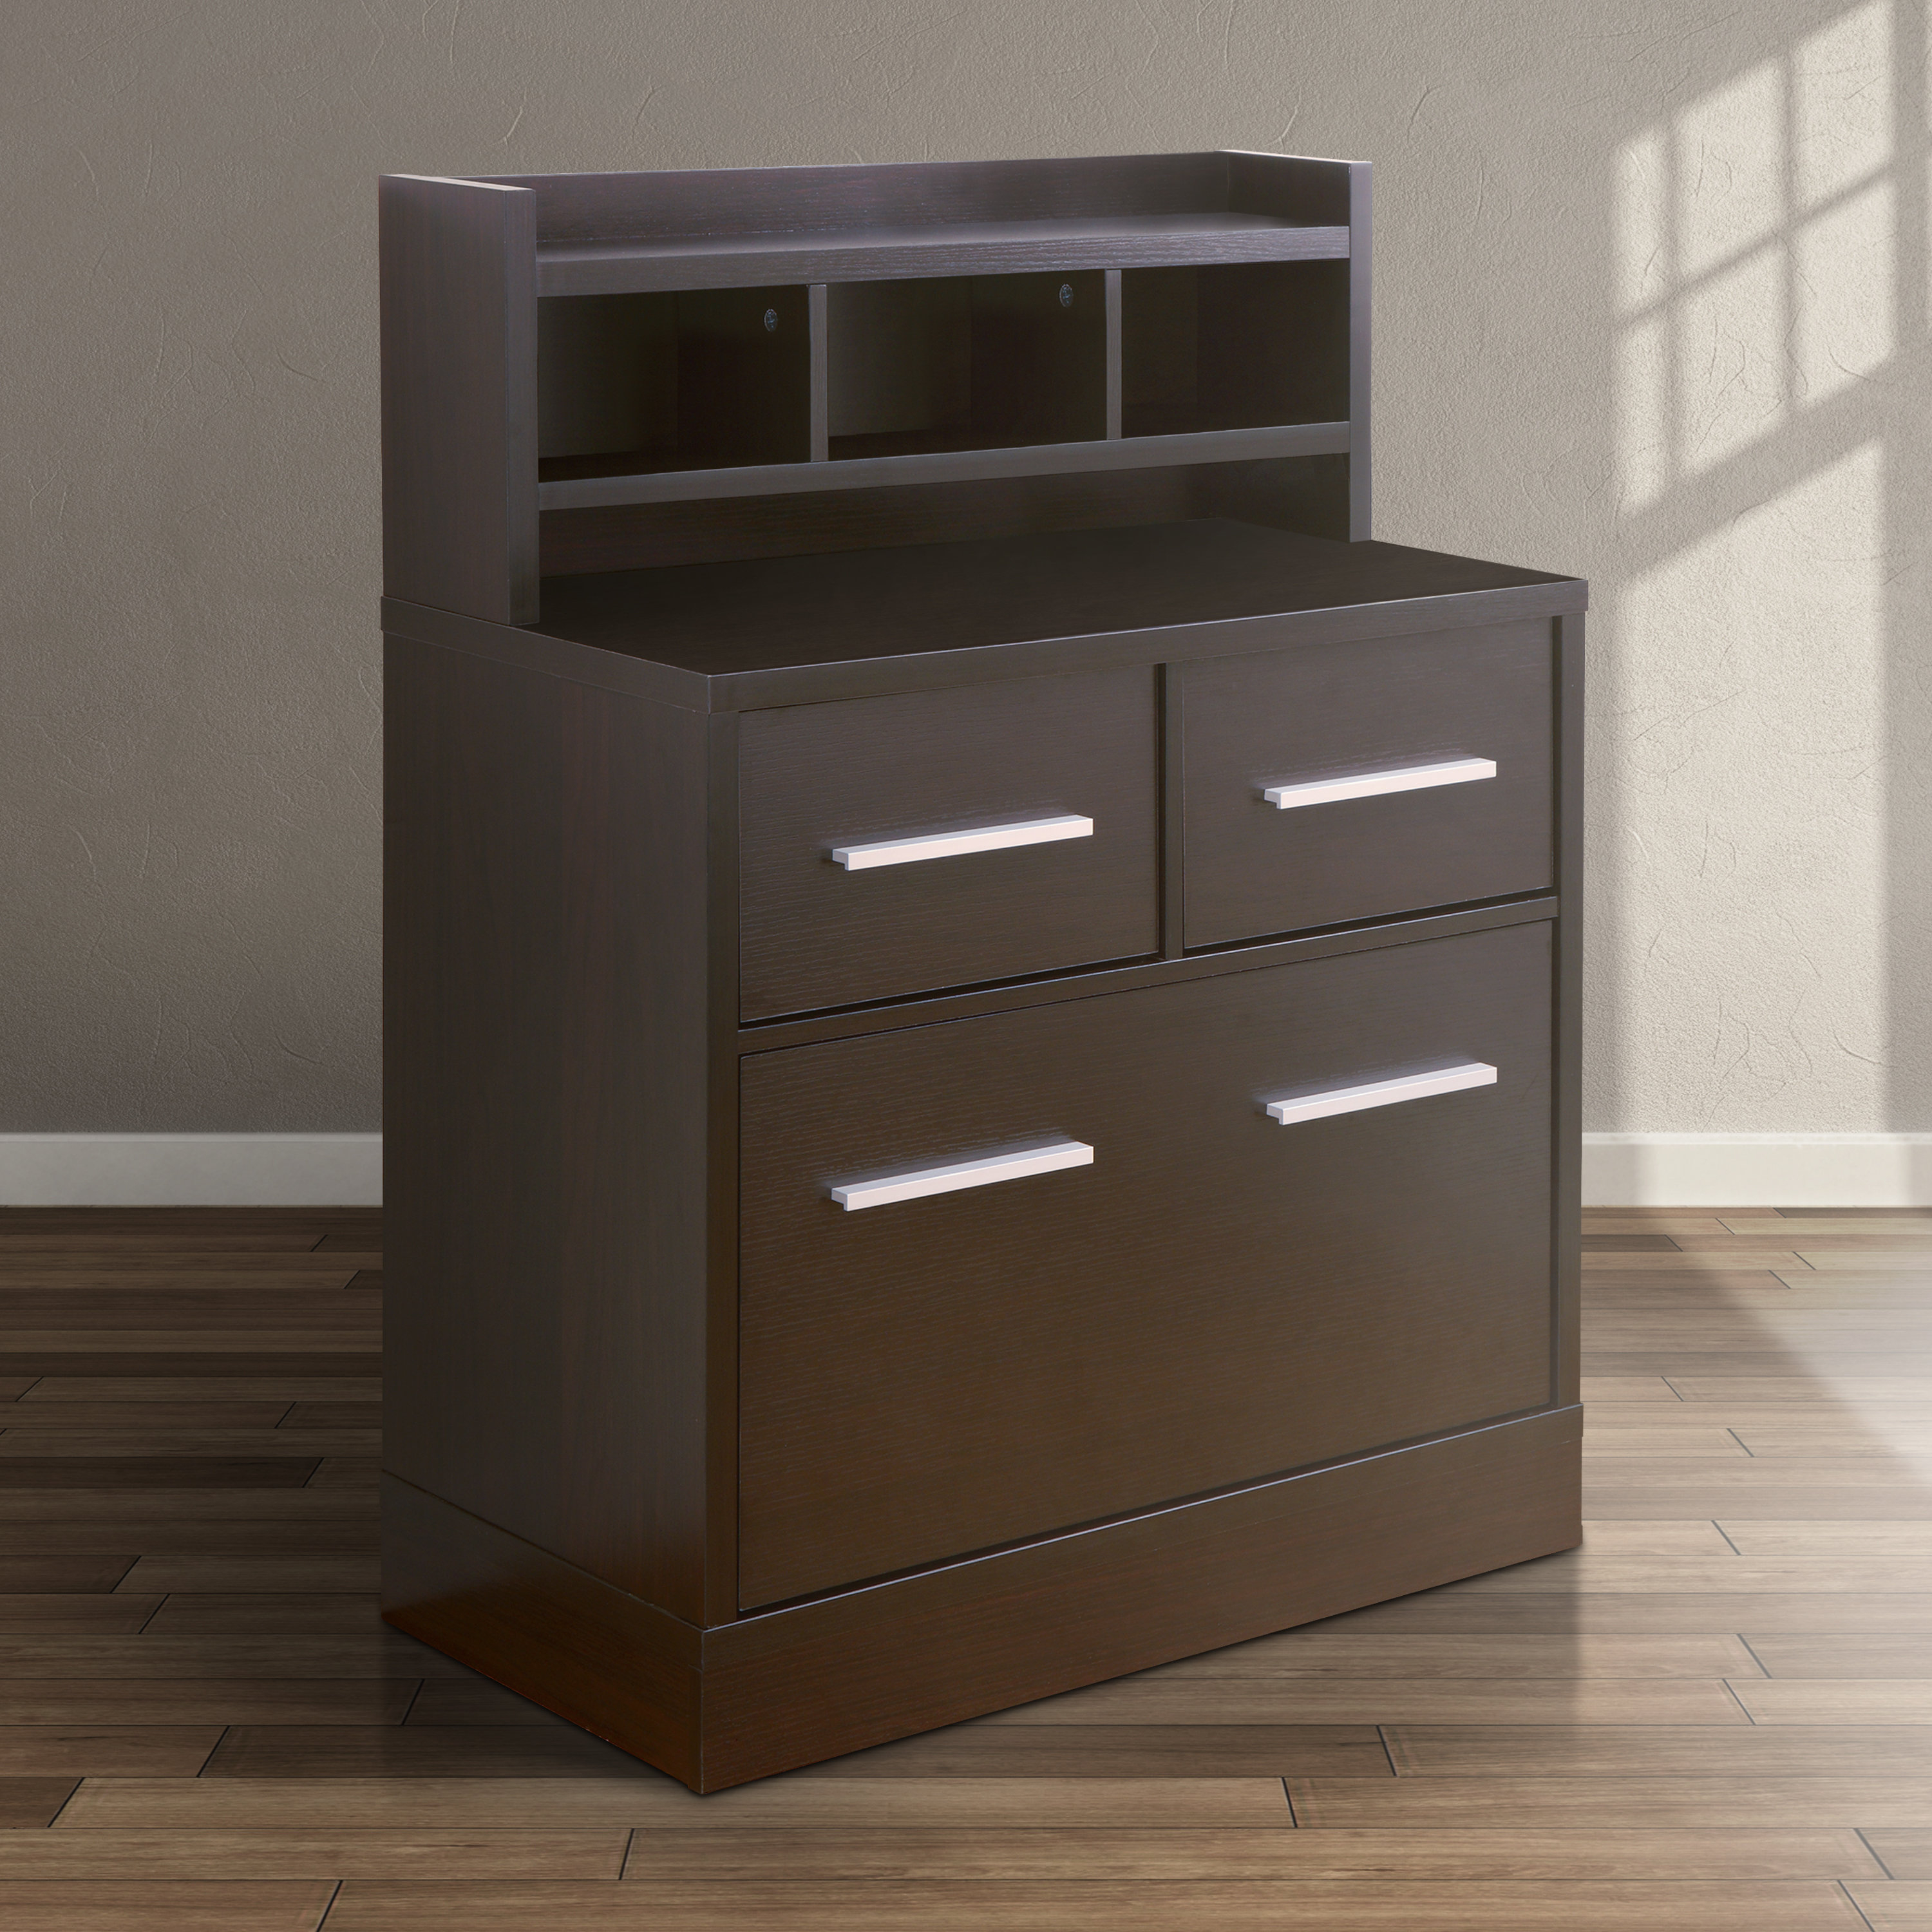 3 Drawer Wood Lateral File • Ideas